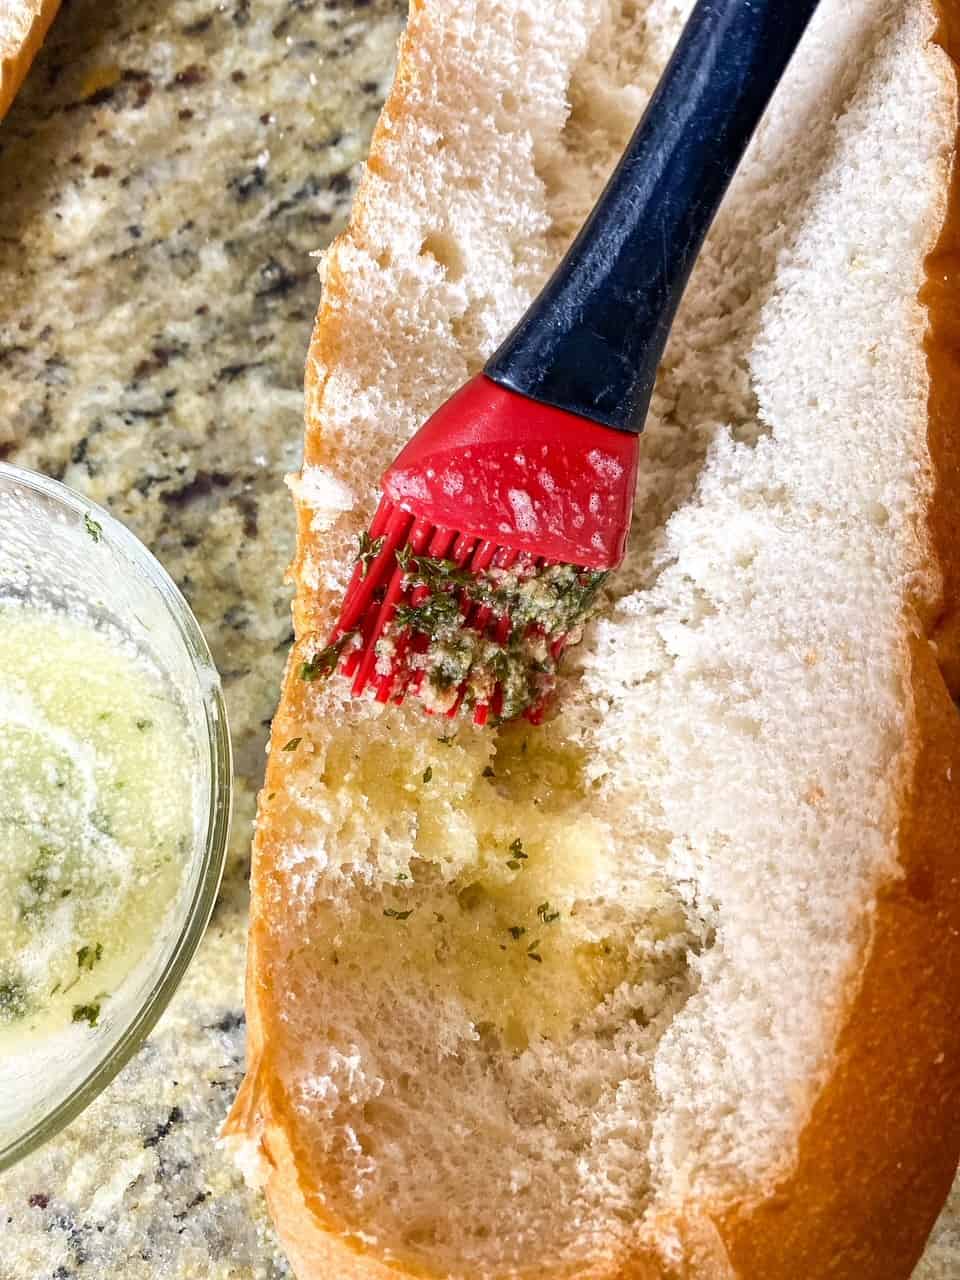 brushing garlic butter onto hollowed out loaf of bread